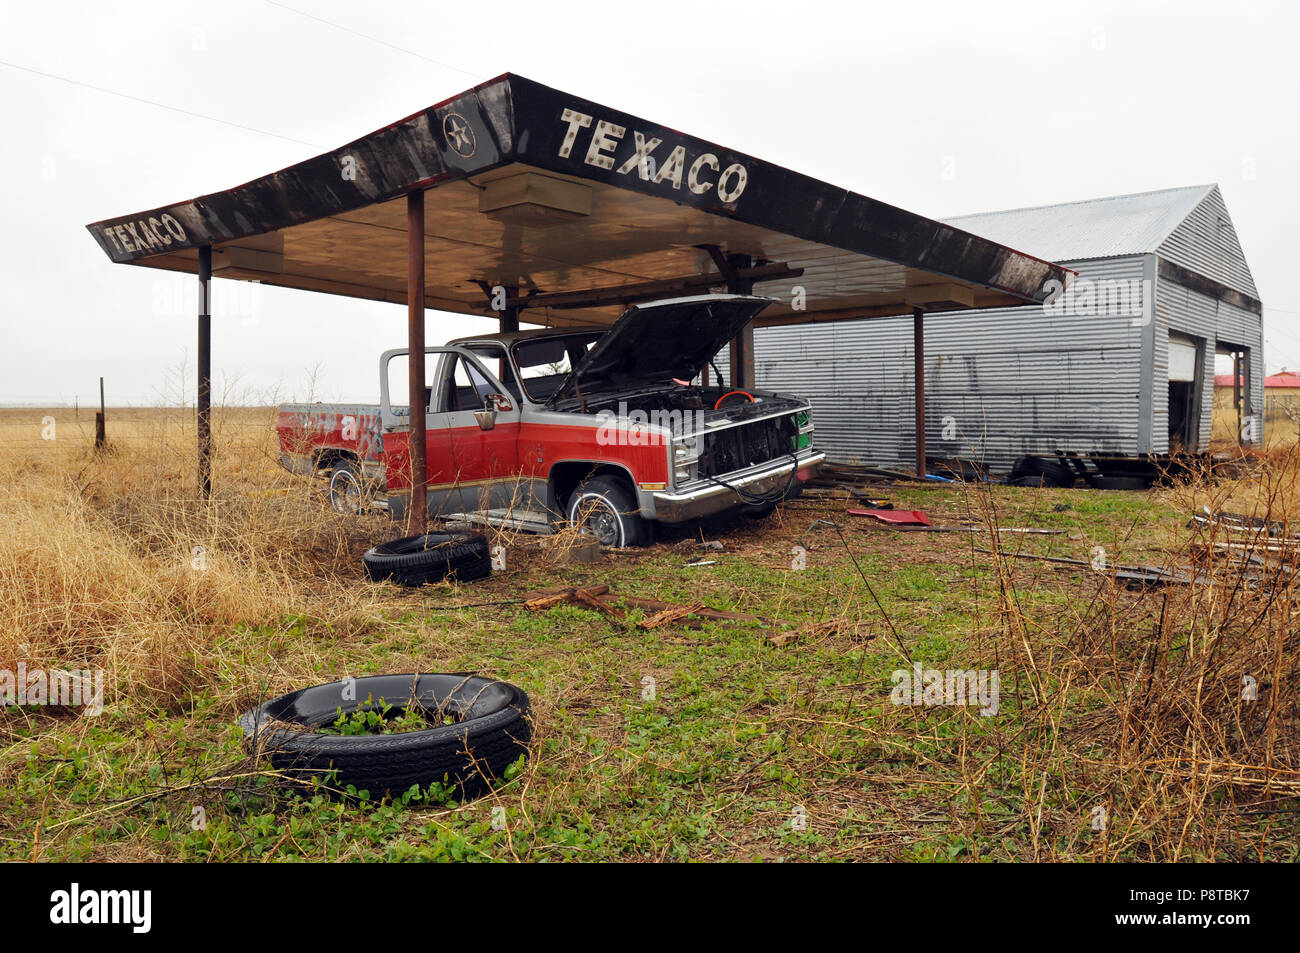 An abandoned Texaco gas station canopy covers an old pickup truck in the Route 66 town of Conway, Texas. The Panhandle town lies east of Amarillo. Stock Photo